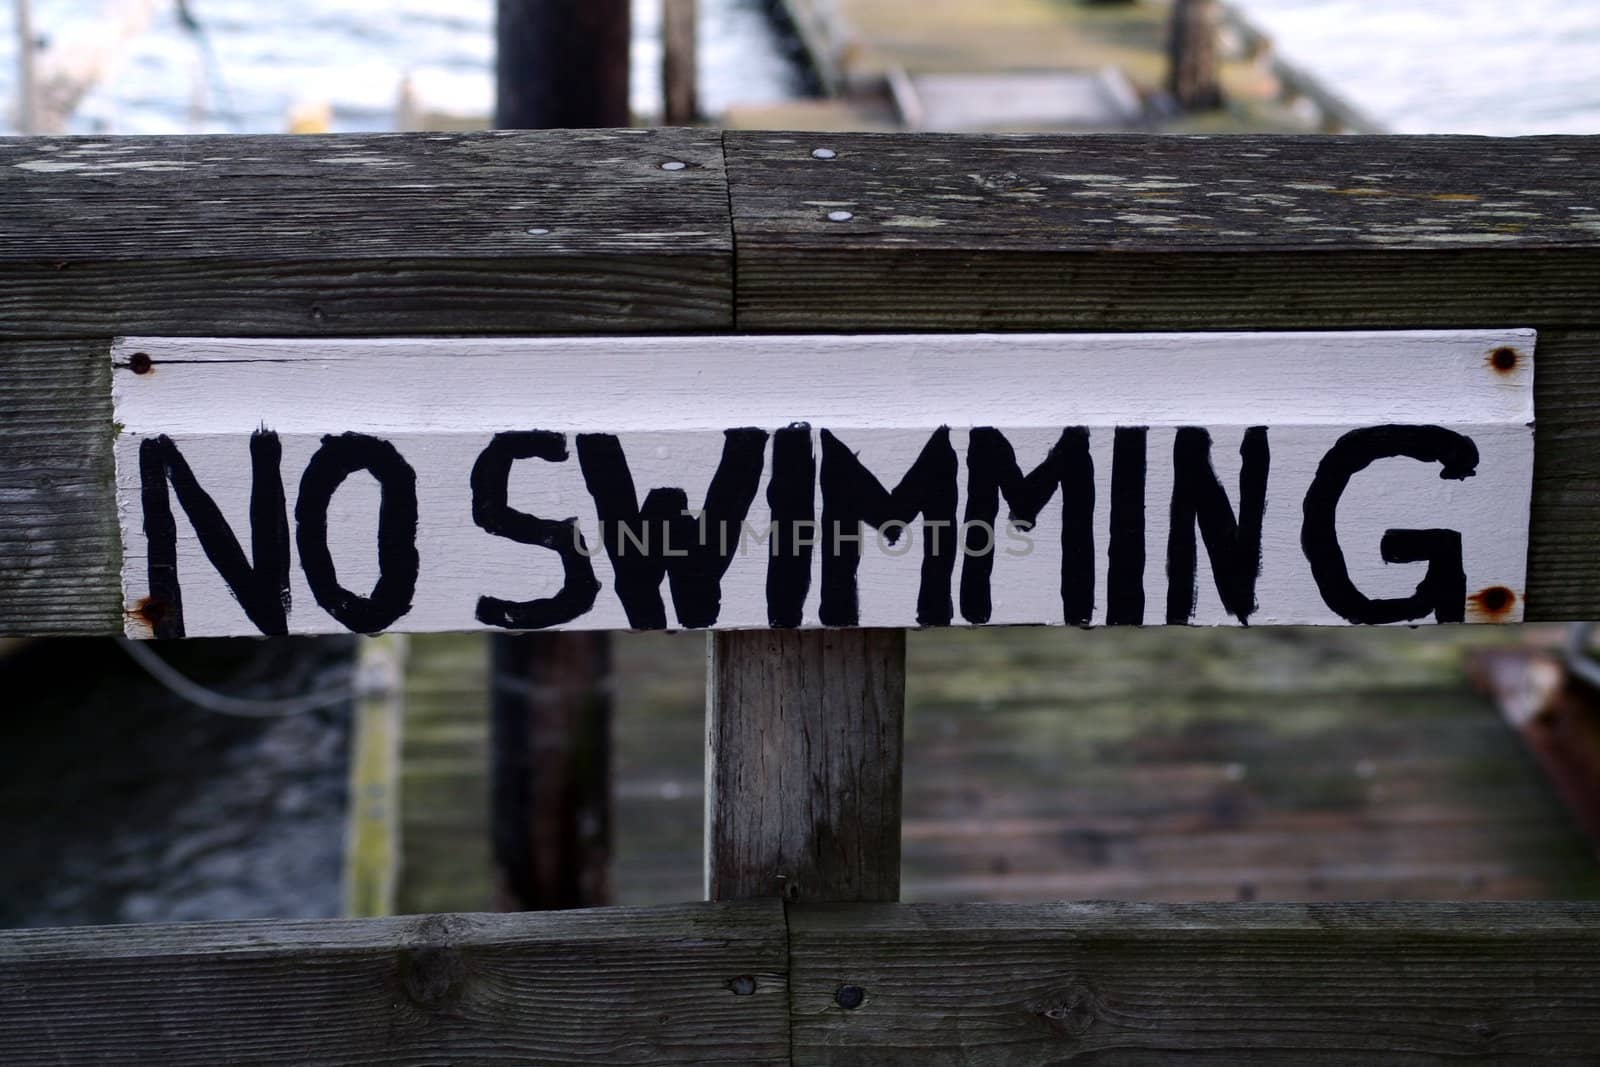 An old wood sign painted with No Swimming.